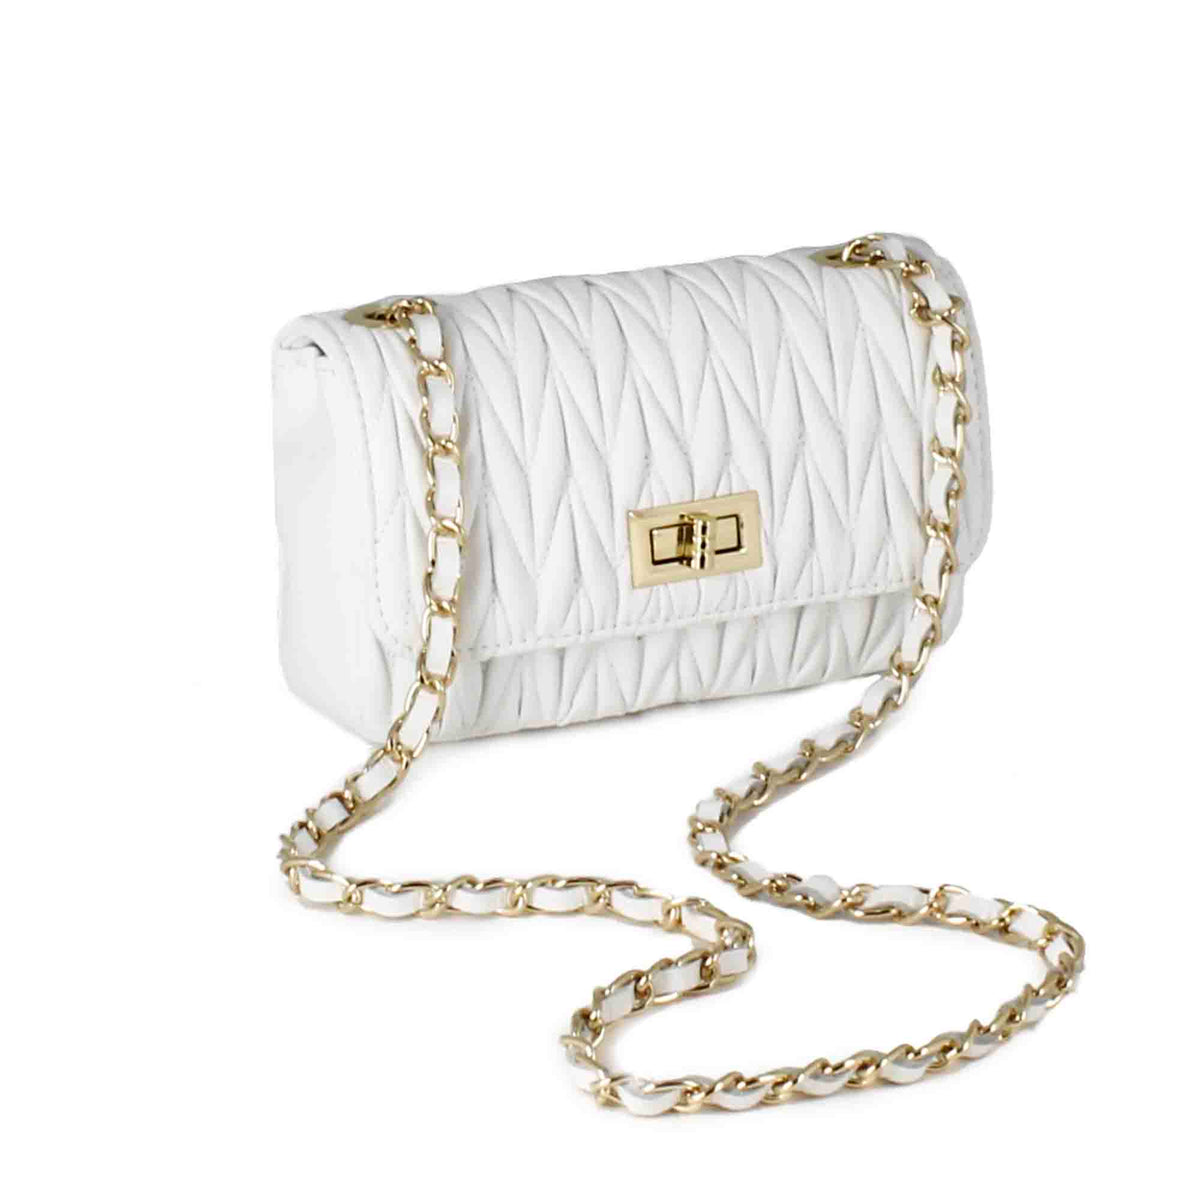 Women's handbag in white leather with jewel shoulder strap